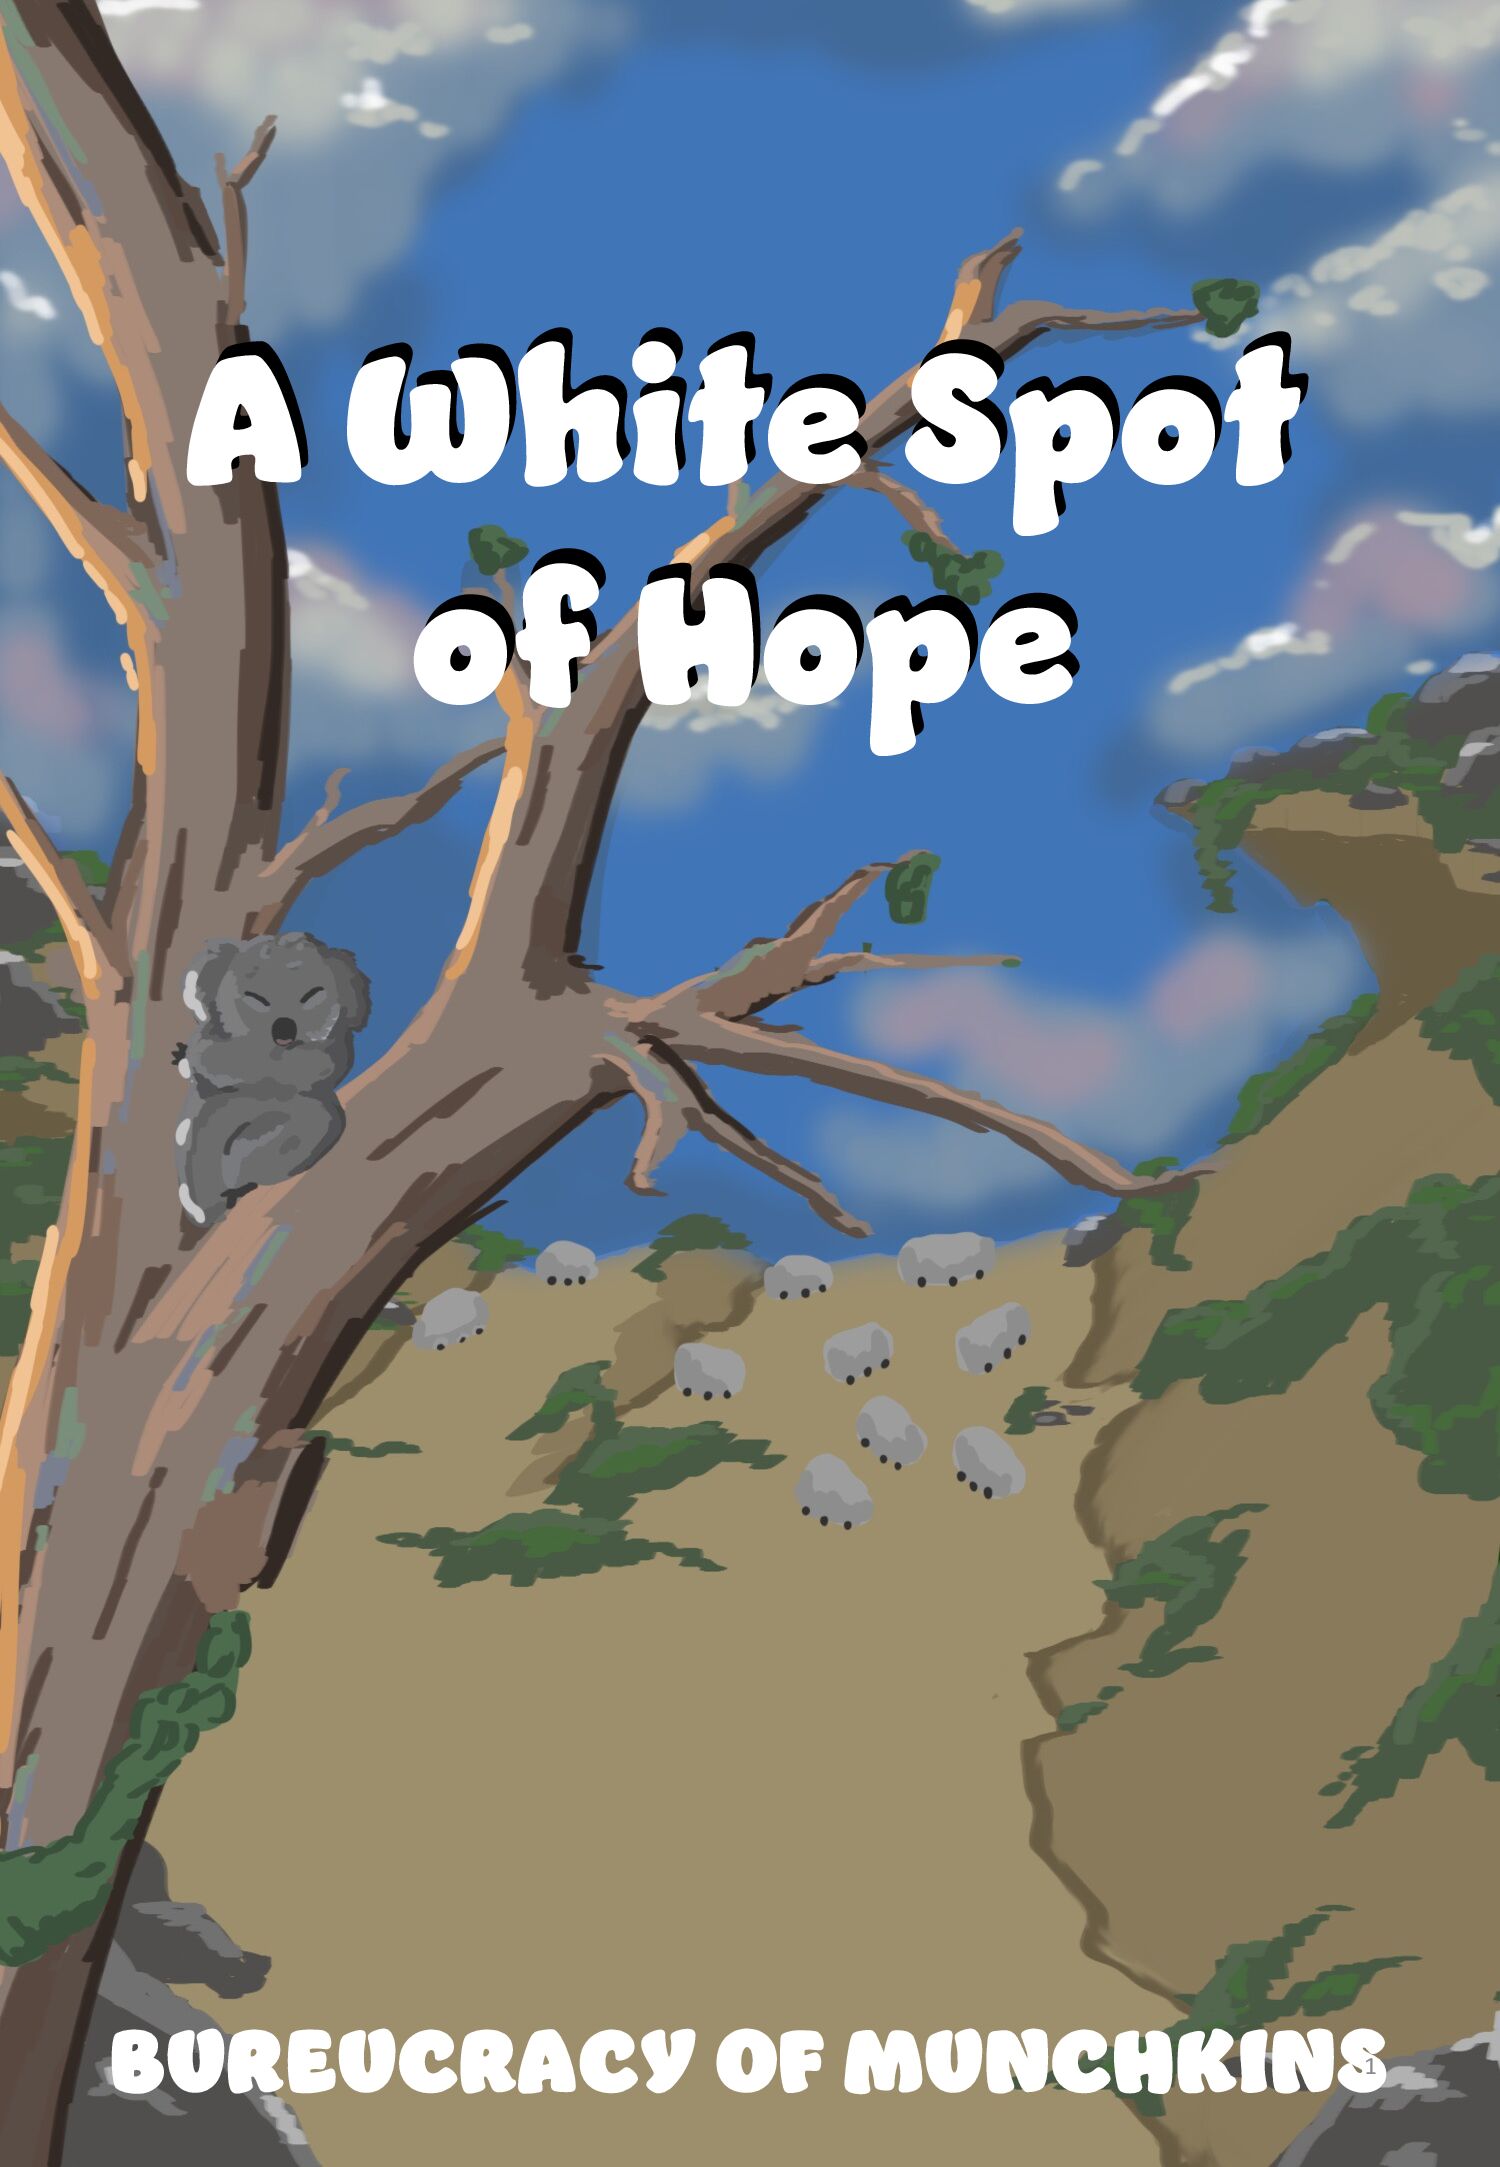 A white spot of hope